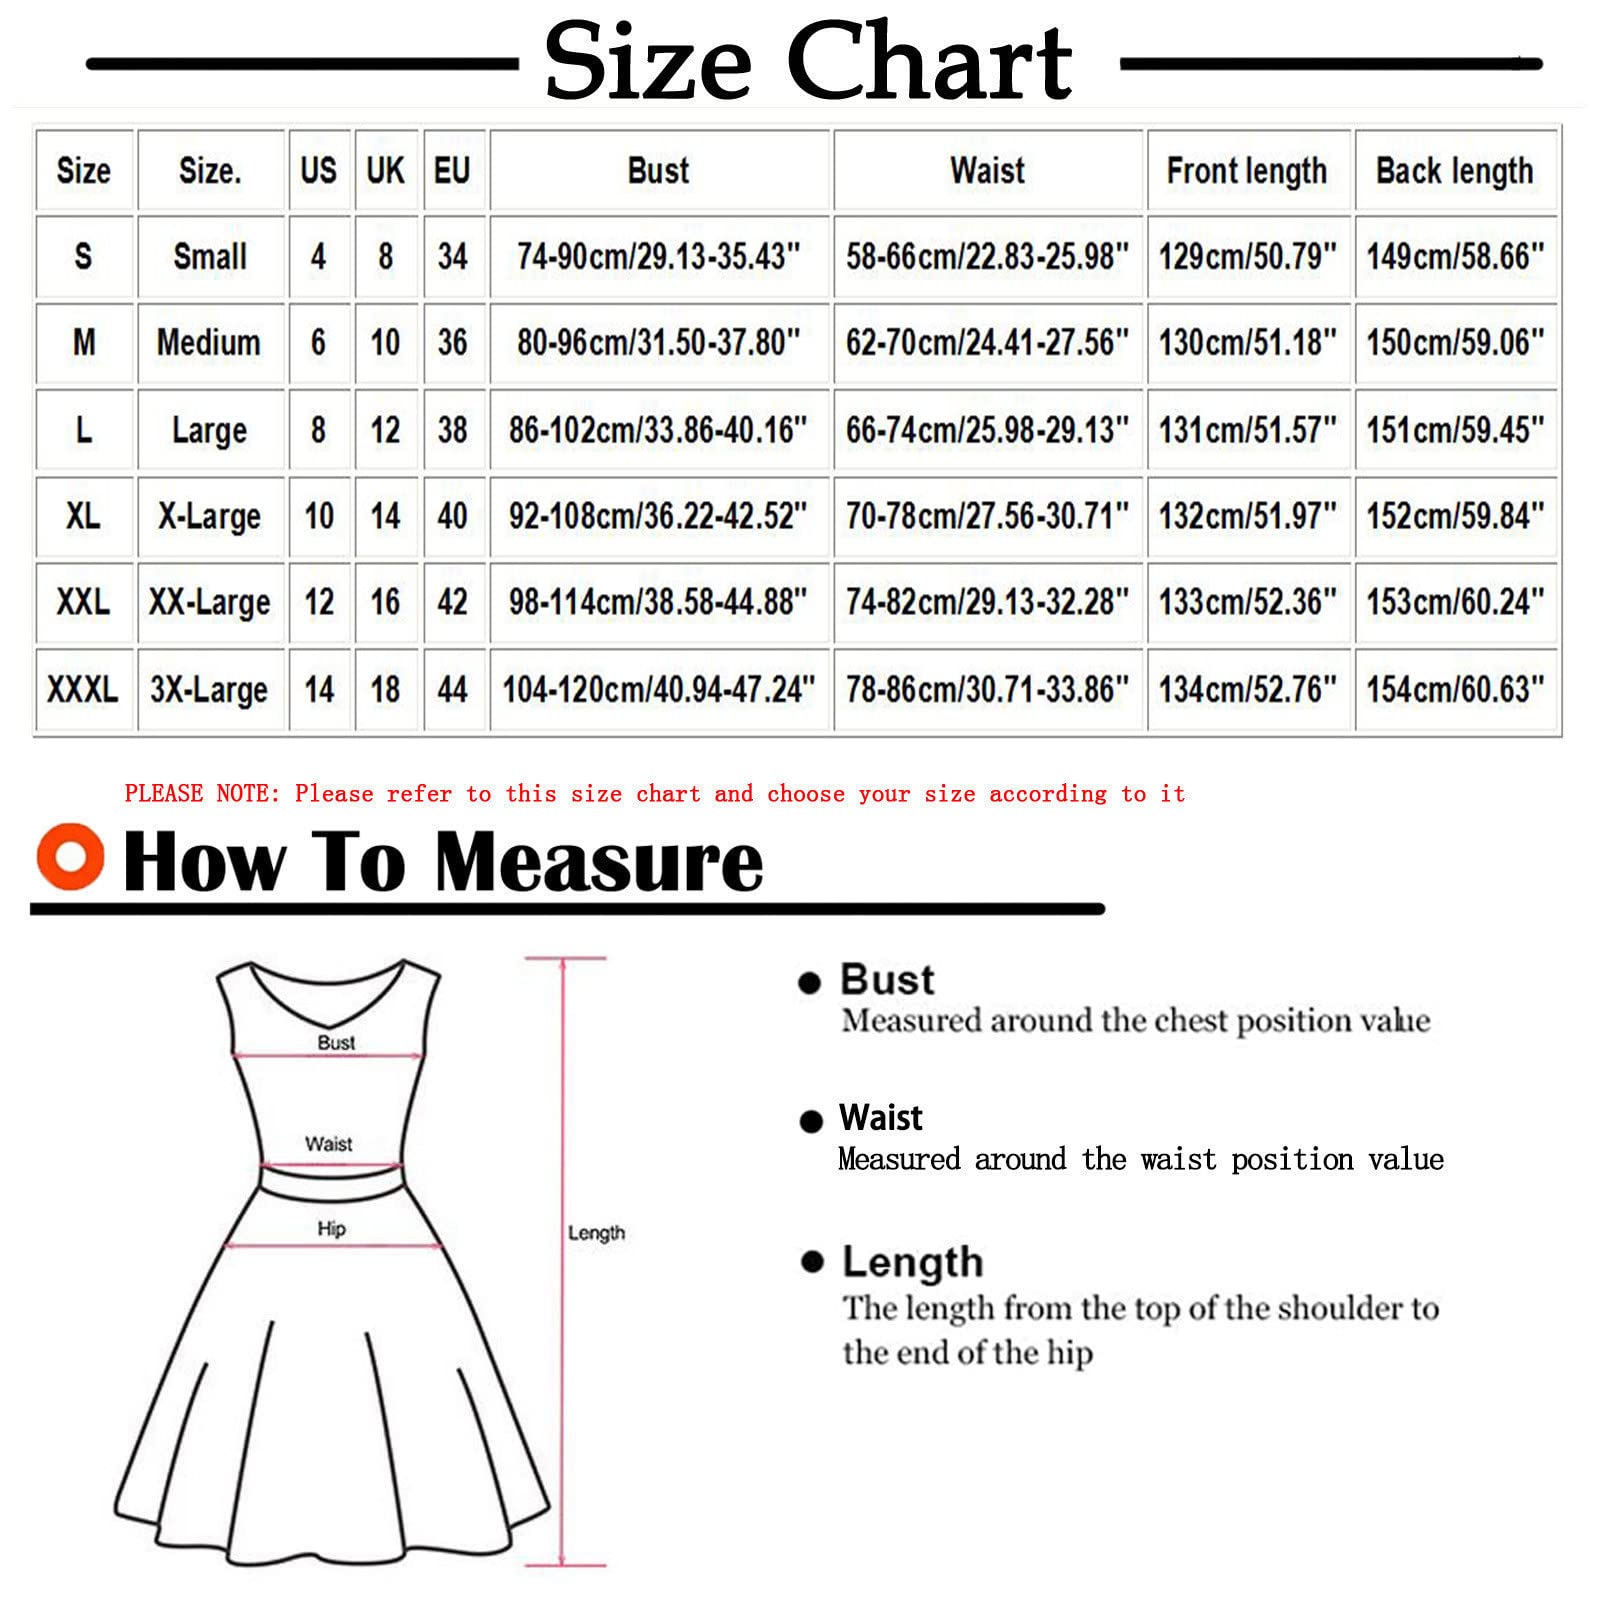 QIGUANDZ Women Slit Floor Length Bridesmaid Gowns Cross Spaghetti Strap Backless Satin Pleated Prom Formal Dress with Pockets